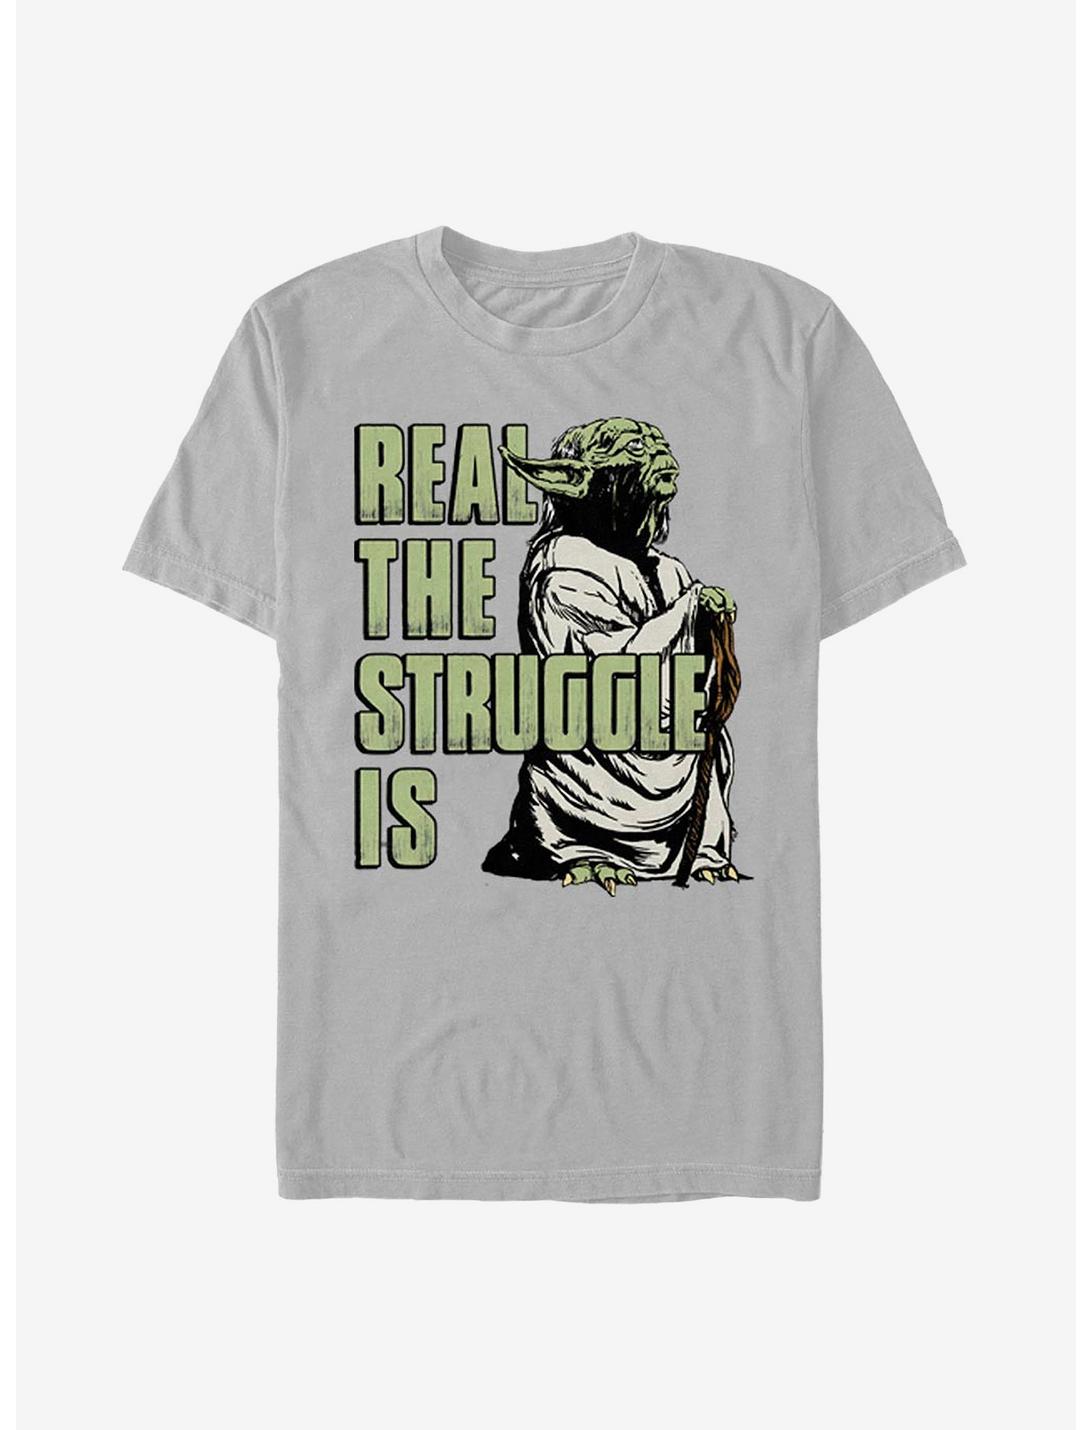 Star Wars Real The Struggle Is T-Shirt, SILVER, hi-res